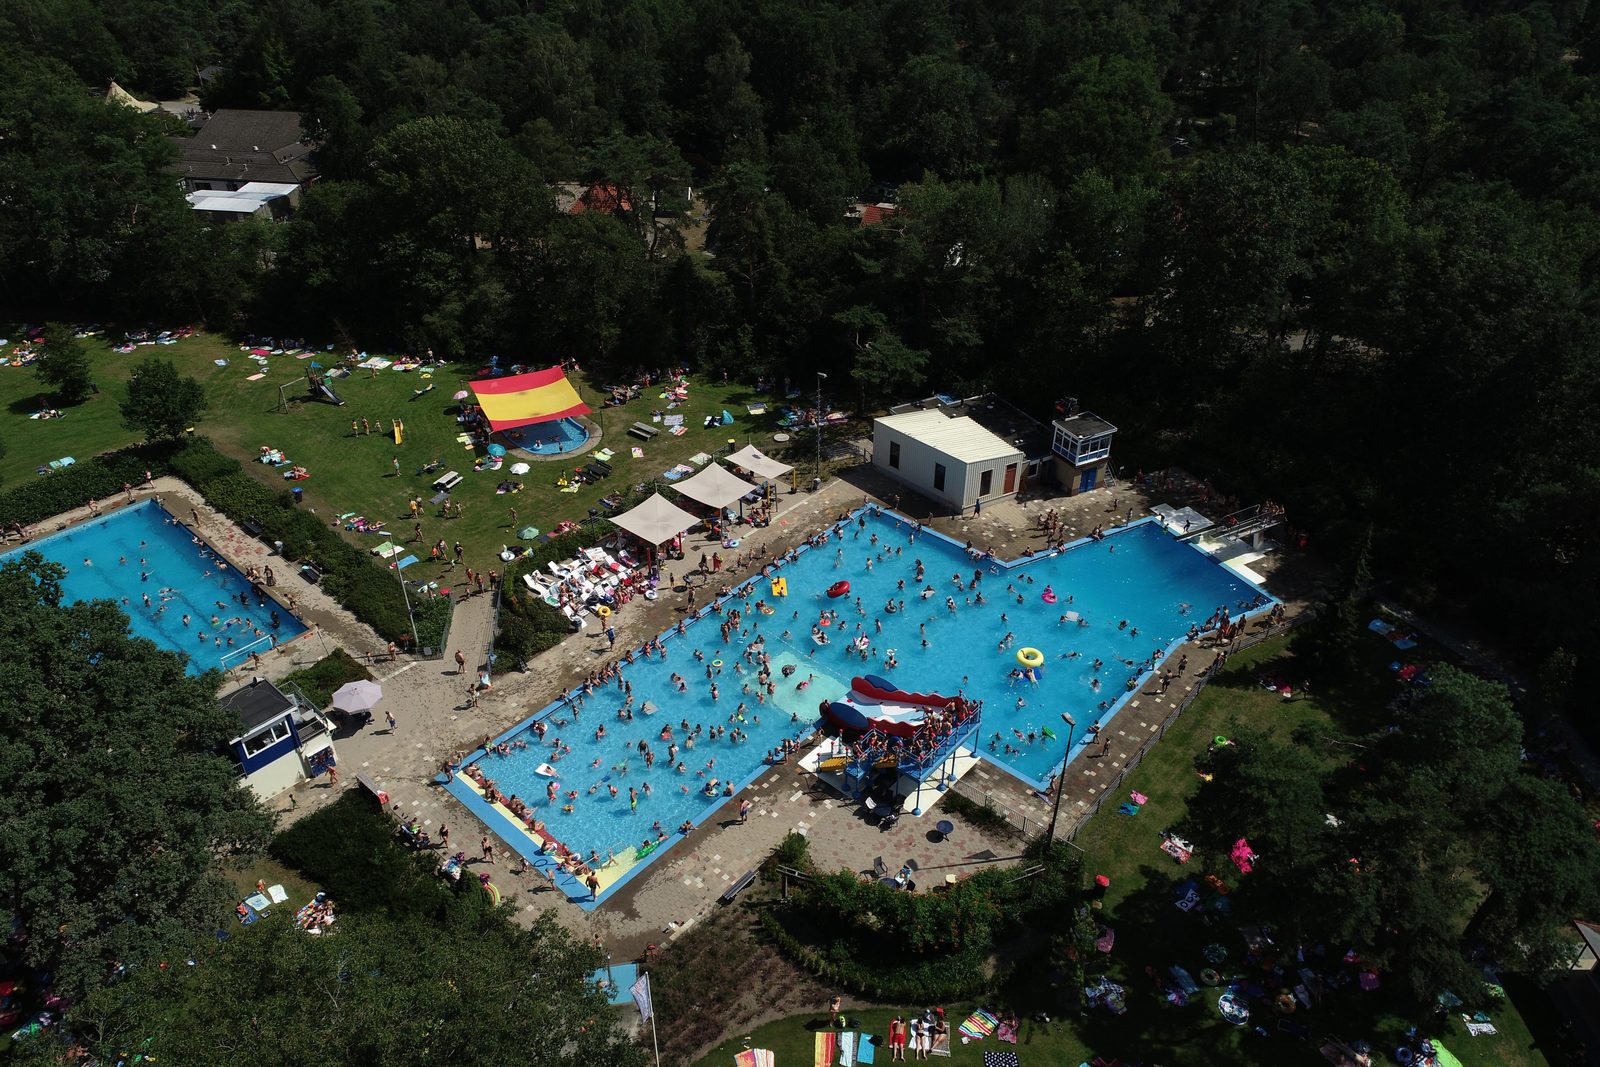 Outdoor heated pool with slides in the woods - 3m by car or 20m walk